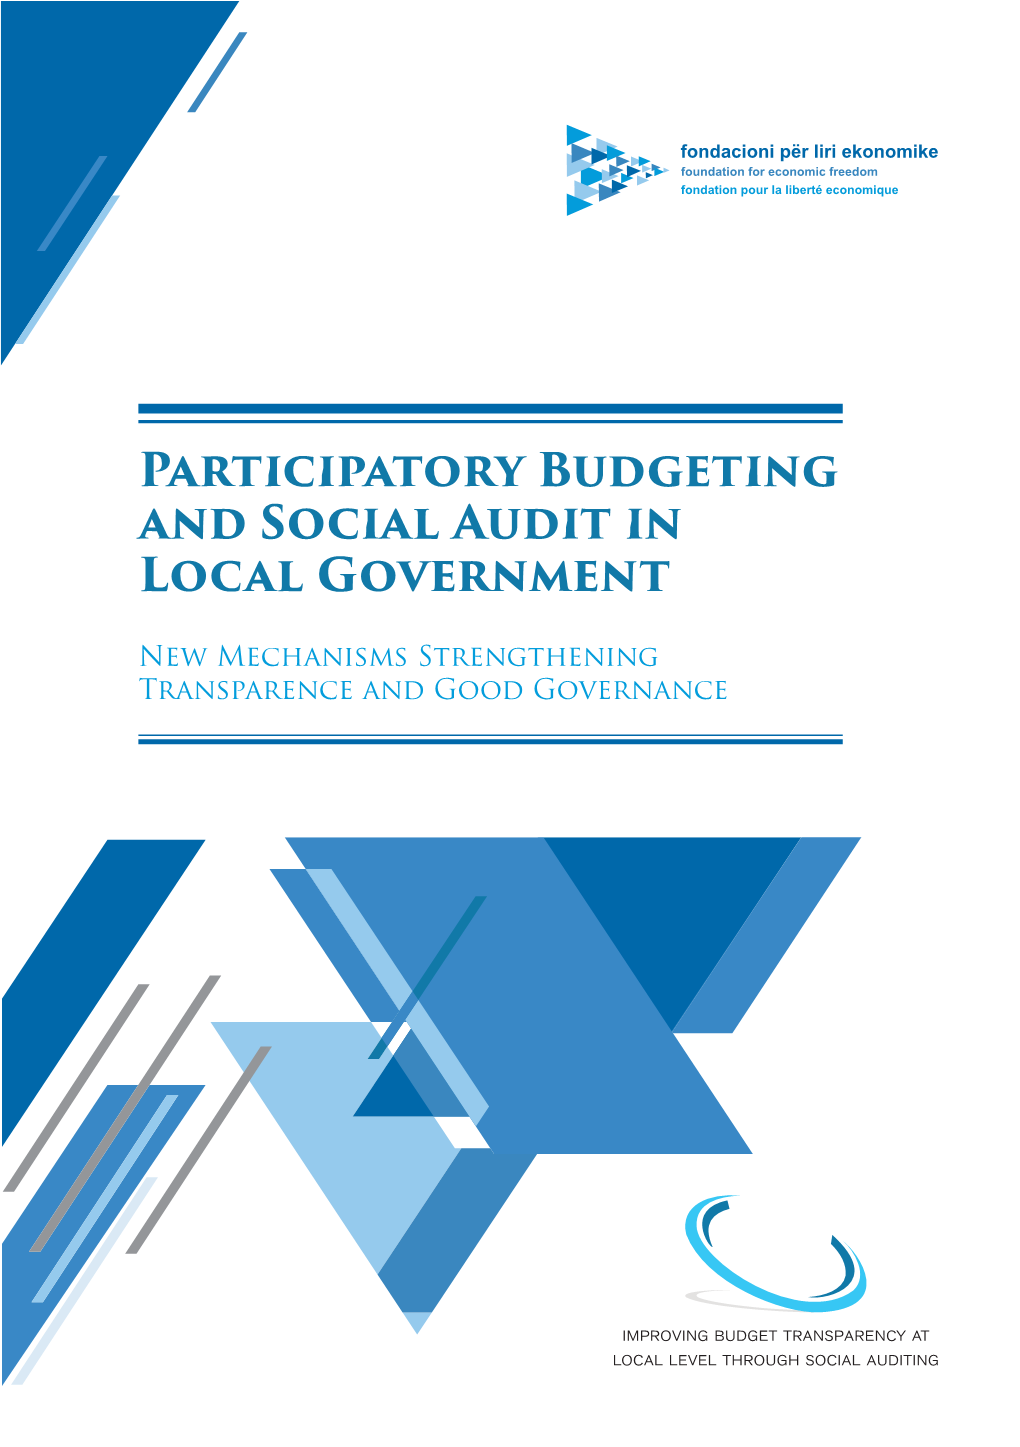 Participatory Budgeting and Social Audit in Local Government